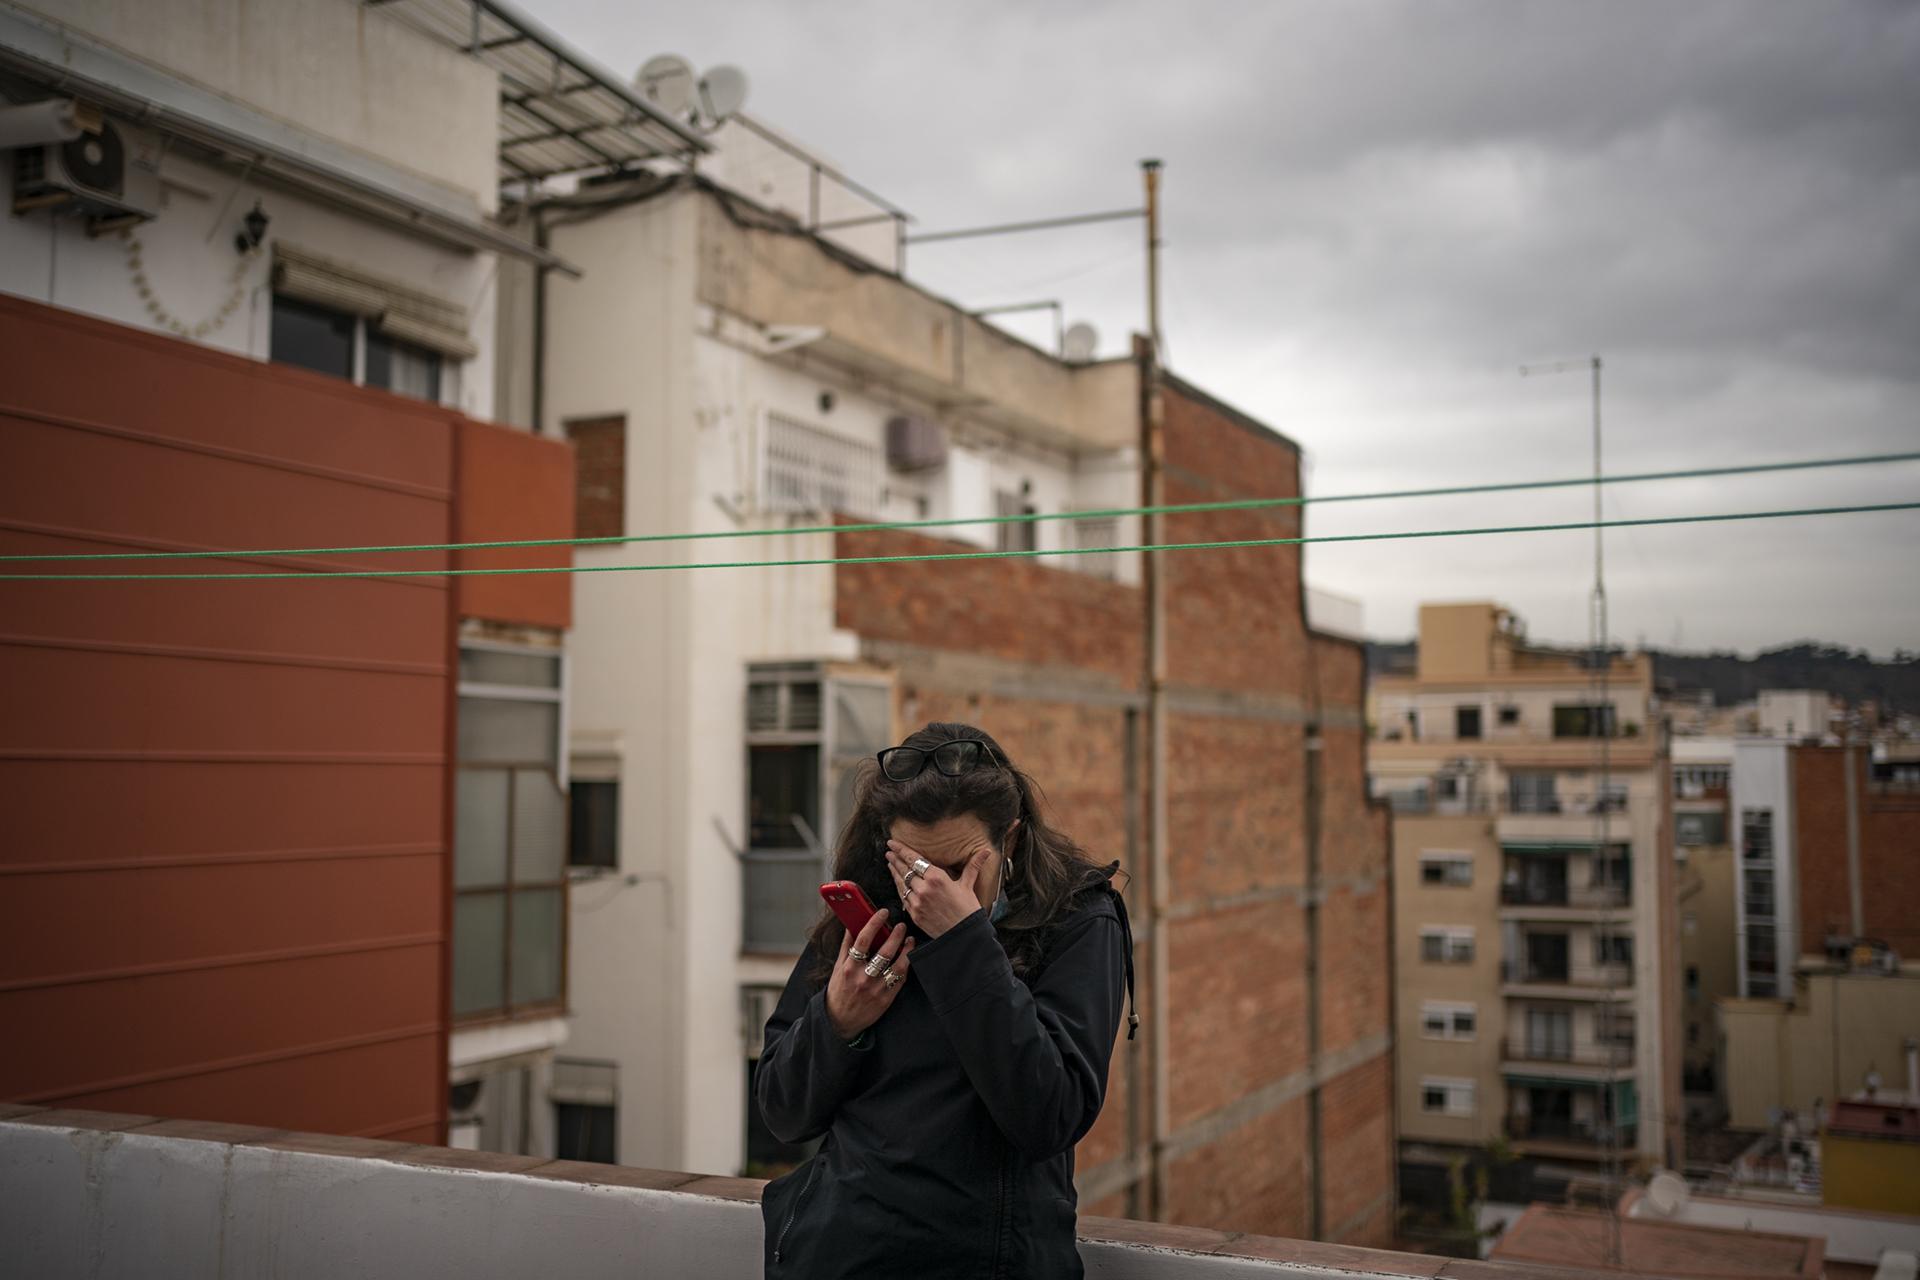  Noemi Tudela, 40, reacts as a friend tells her by phone that the police have arrived to evict her from her apartment in the Sant Andreu neighbourhood of Barcelona, on April 7, 2021. Ms. Tudela has been accused of squatting in the apartment of a owner who have multiples proprieties since March 2017. Tudela has vulnerable status. Despite the presence of dozens of activists, the eviction was carried out. &nbsp; &nbsp; &nbsp; &nbsp; &nbsp; &nbsp; &nbsp; &nbsp; &nbsp; &nbsp; &nbsp; &nbsp; &nbsp; &nbsp; &nbsp; &nbsp; &nbsp; &nbsp; 